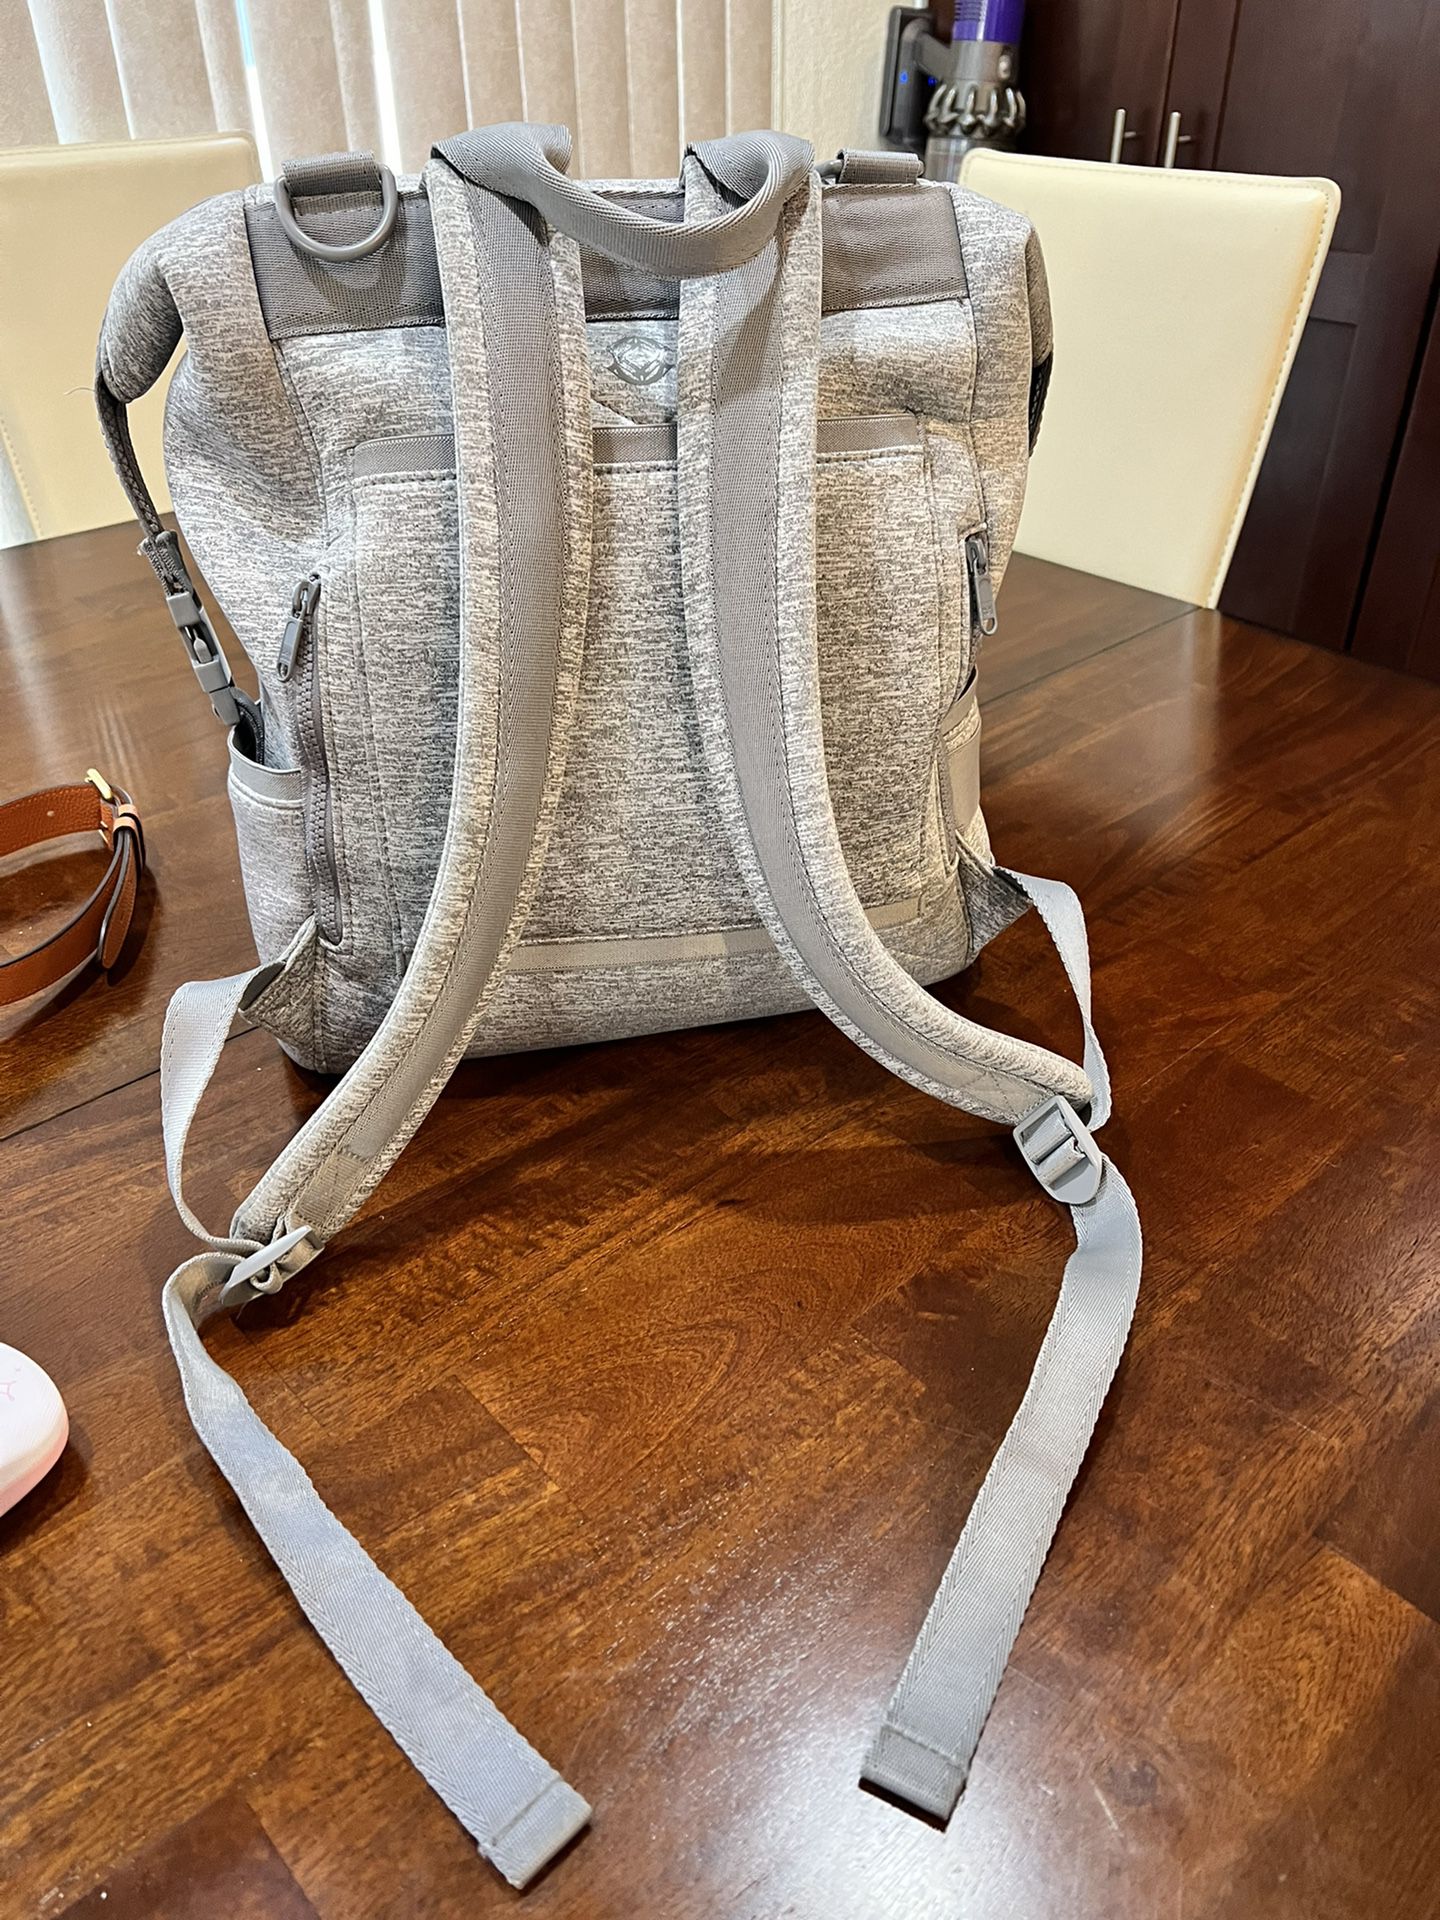 Dagne Dover Dark Moss Indi Diaper Backpack Large for Sale in Addison, IL -  OfferUp